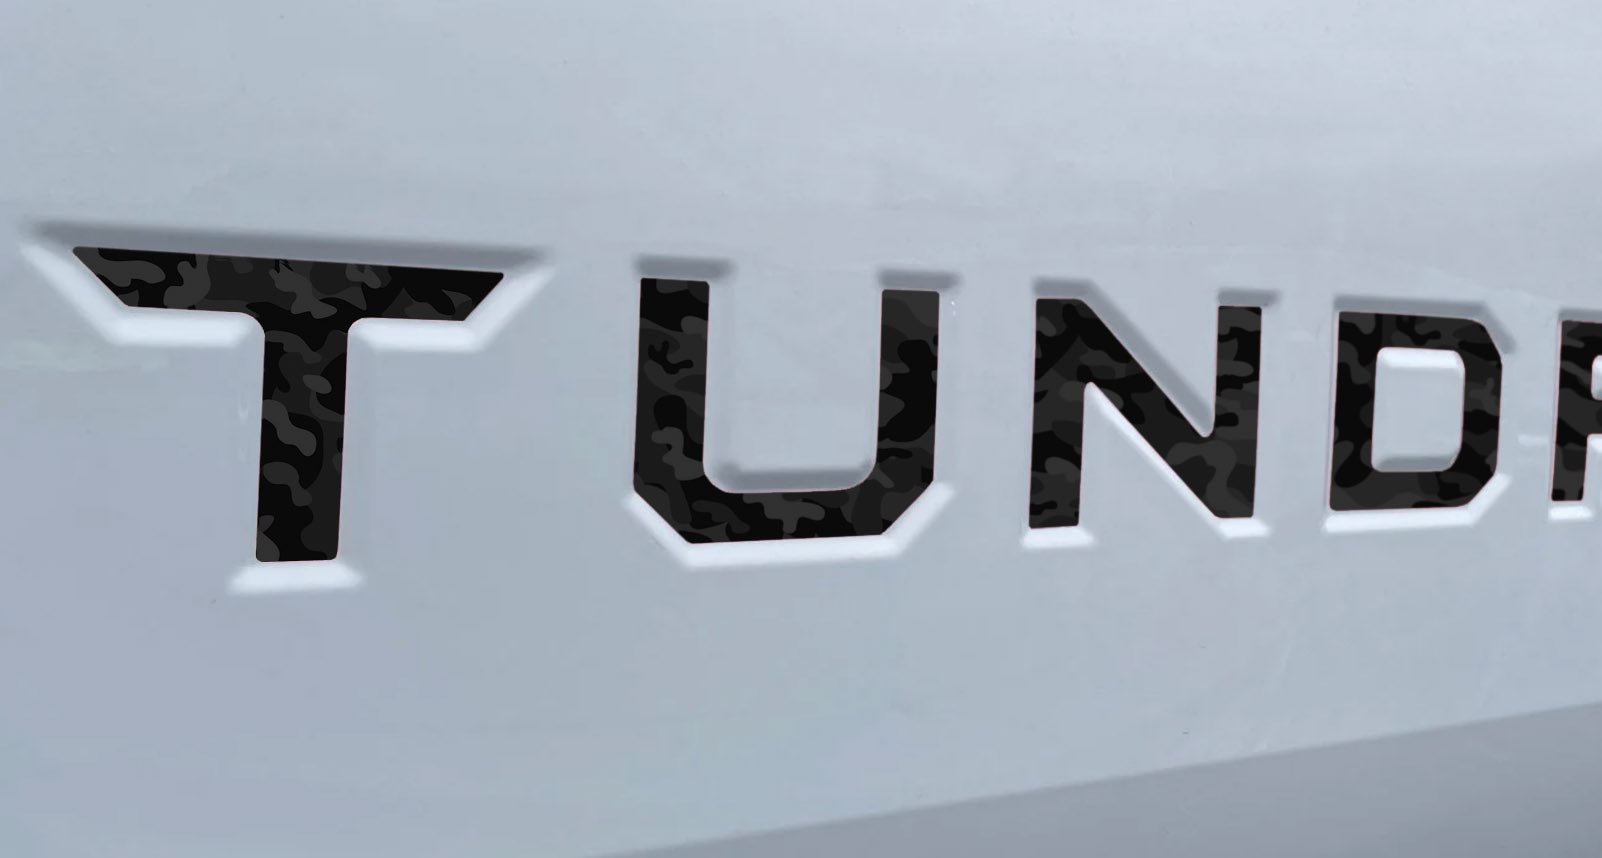 Black Camo Vinyl Letter Decals for 2022-2023 Tundra Tailgate – TVD